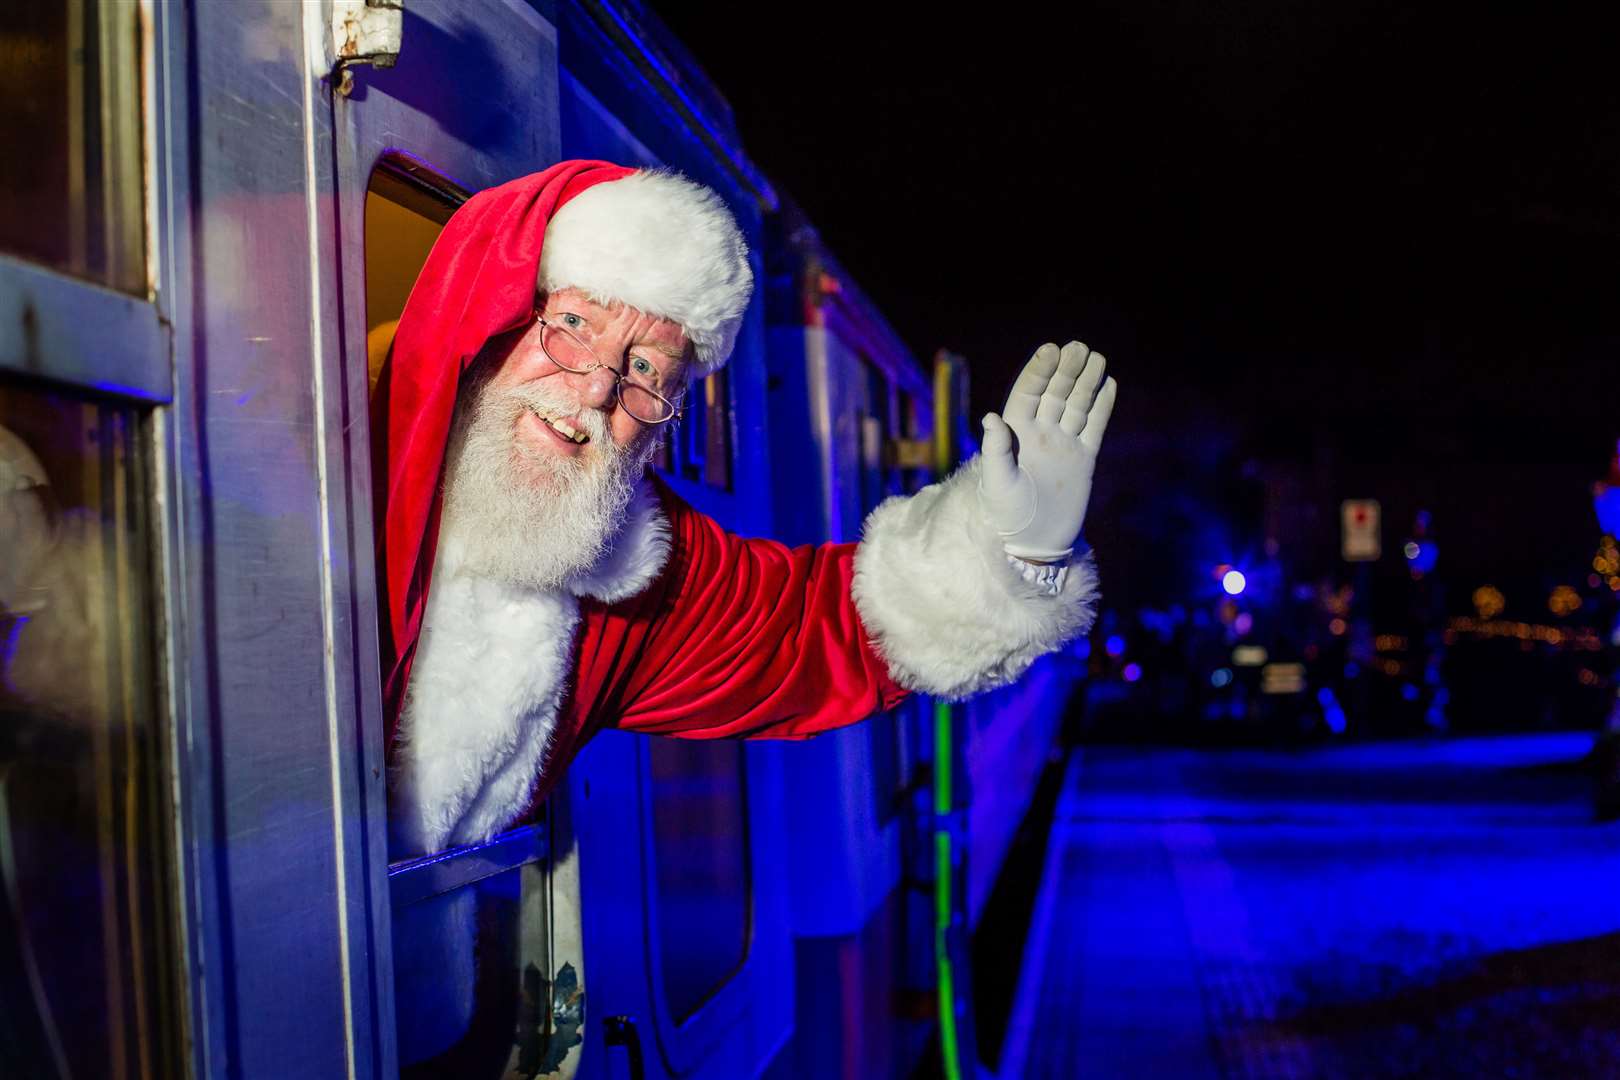 Father Christmas will meet passengers on board